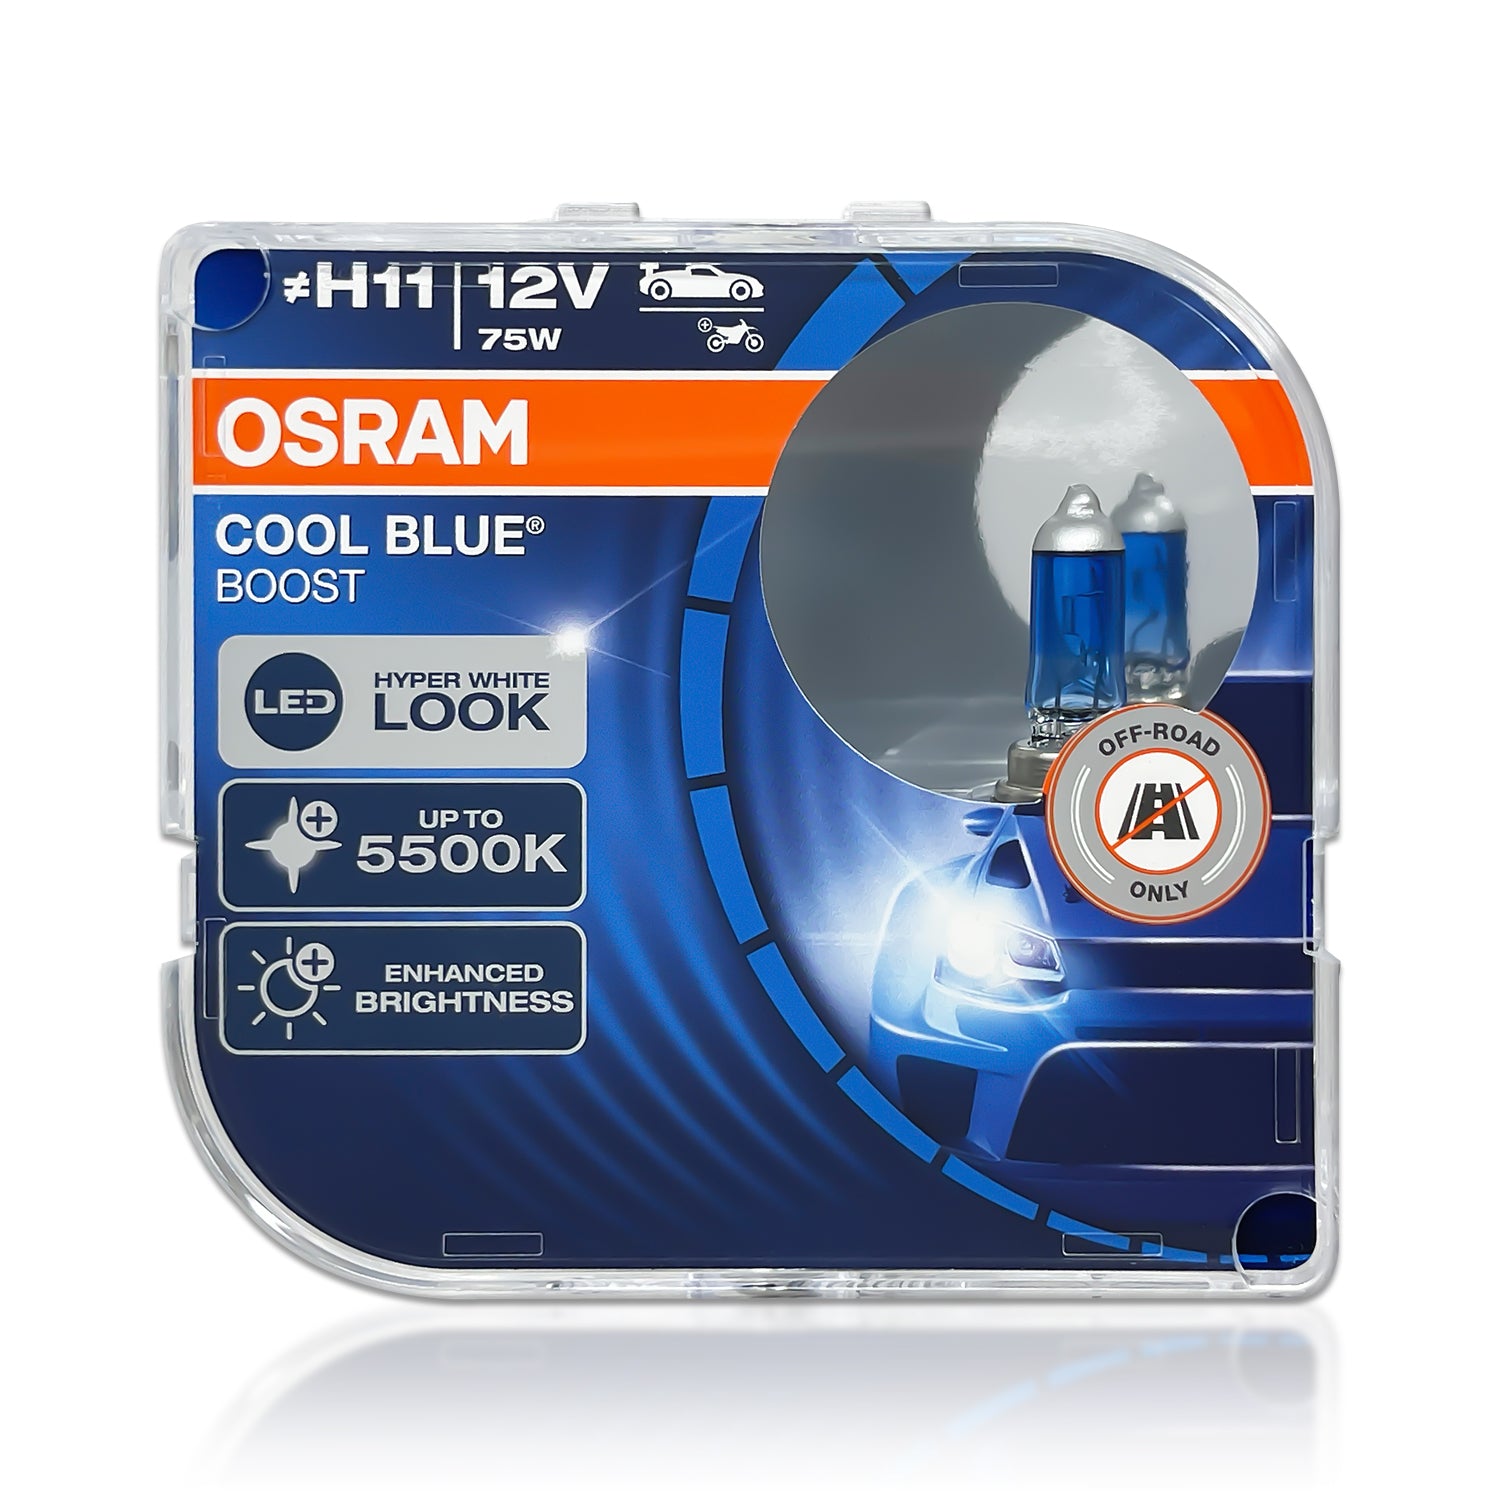 Kit 2 Lamps H11 12V/75W Osram Cool Blue Boost Hcb